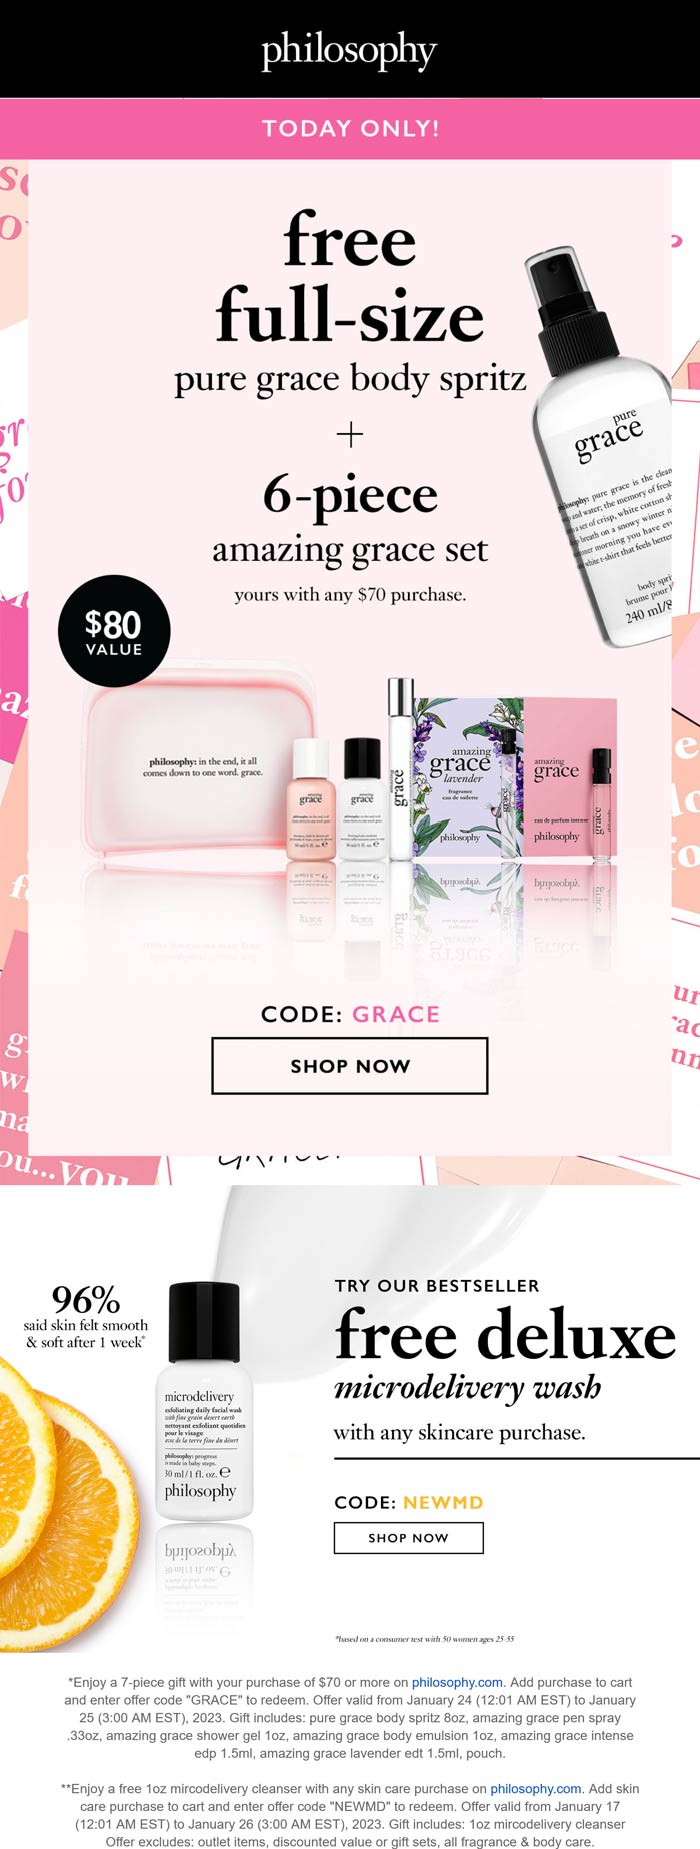 Philosophy stores Coupon  Free full size body spritz & 6pc set on $70 today at Philosophy via promo code GRACE #philosophy 